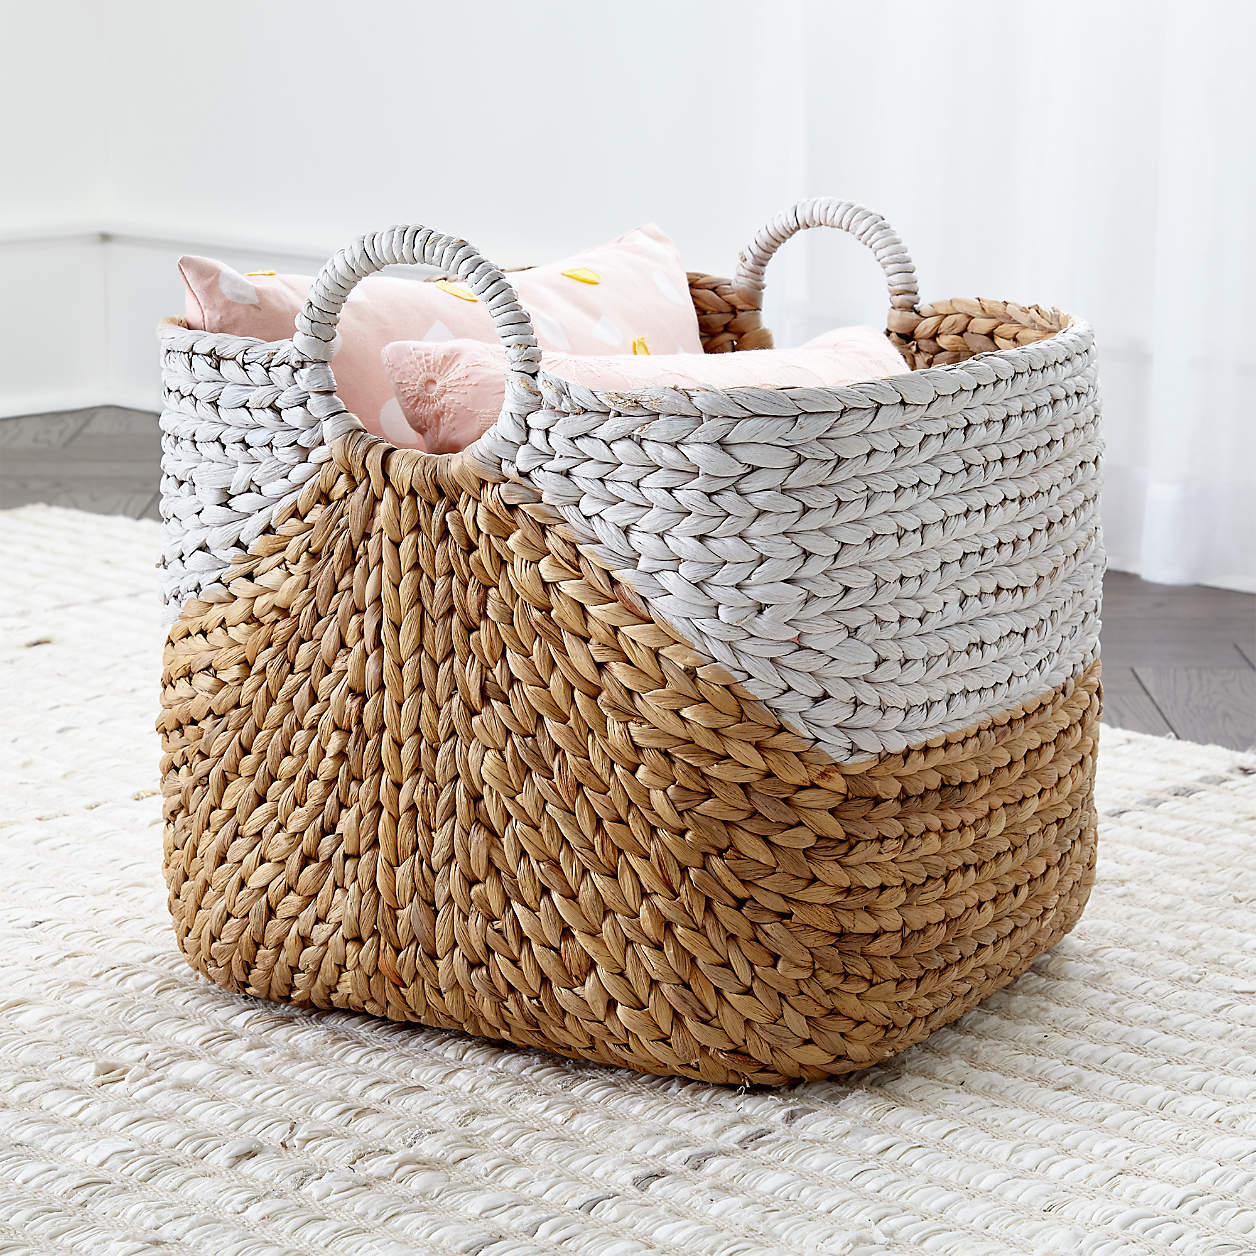 Basket with white paint